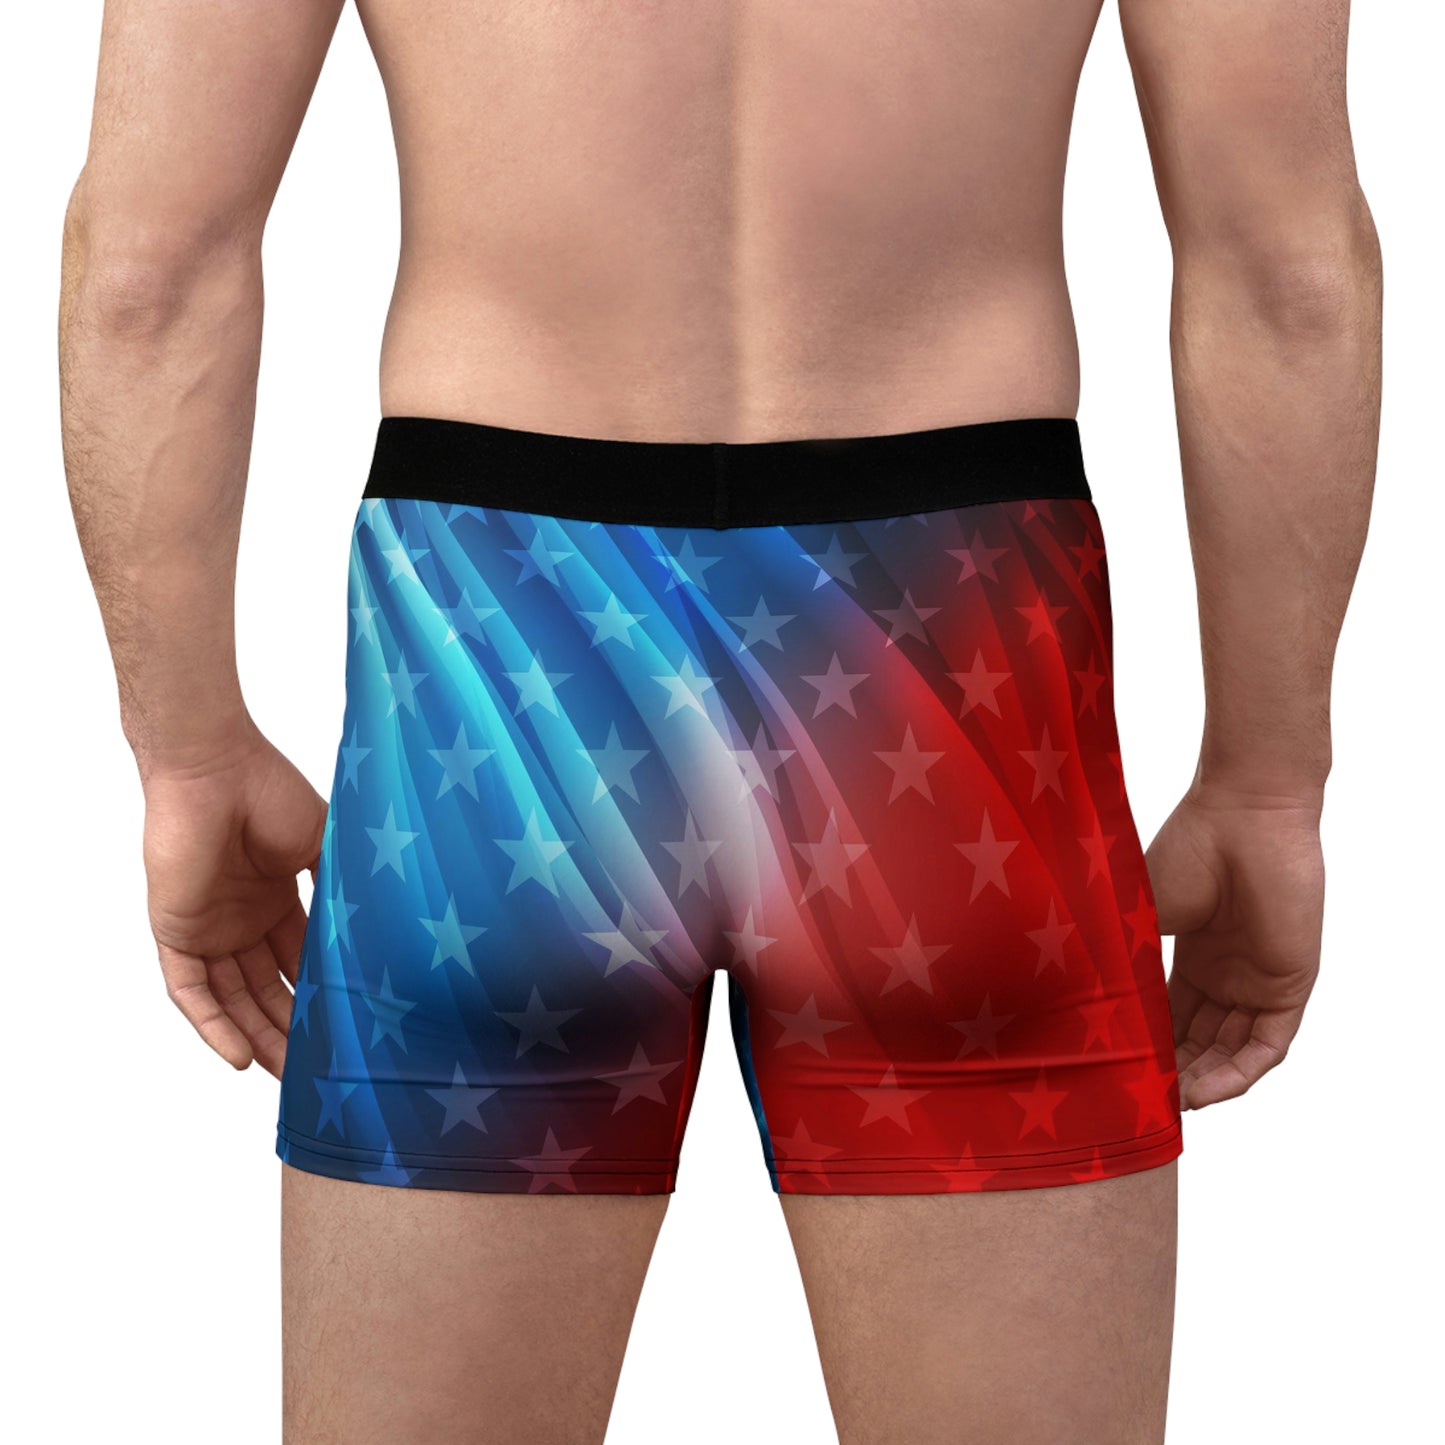 Party in the USA Men's Boxer Briefs